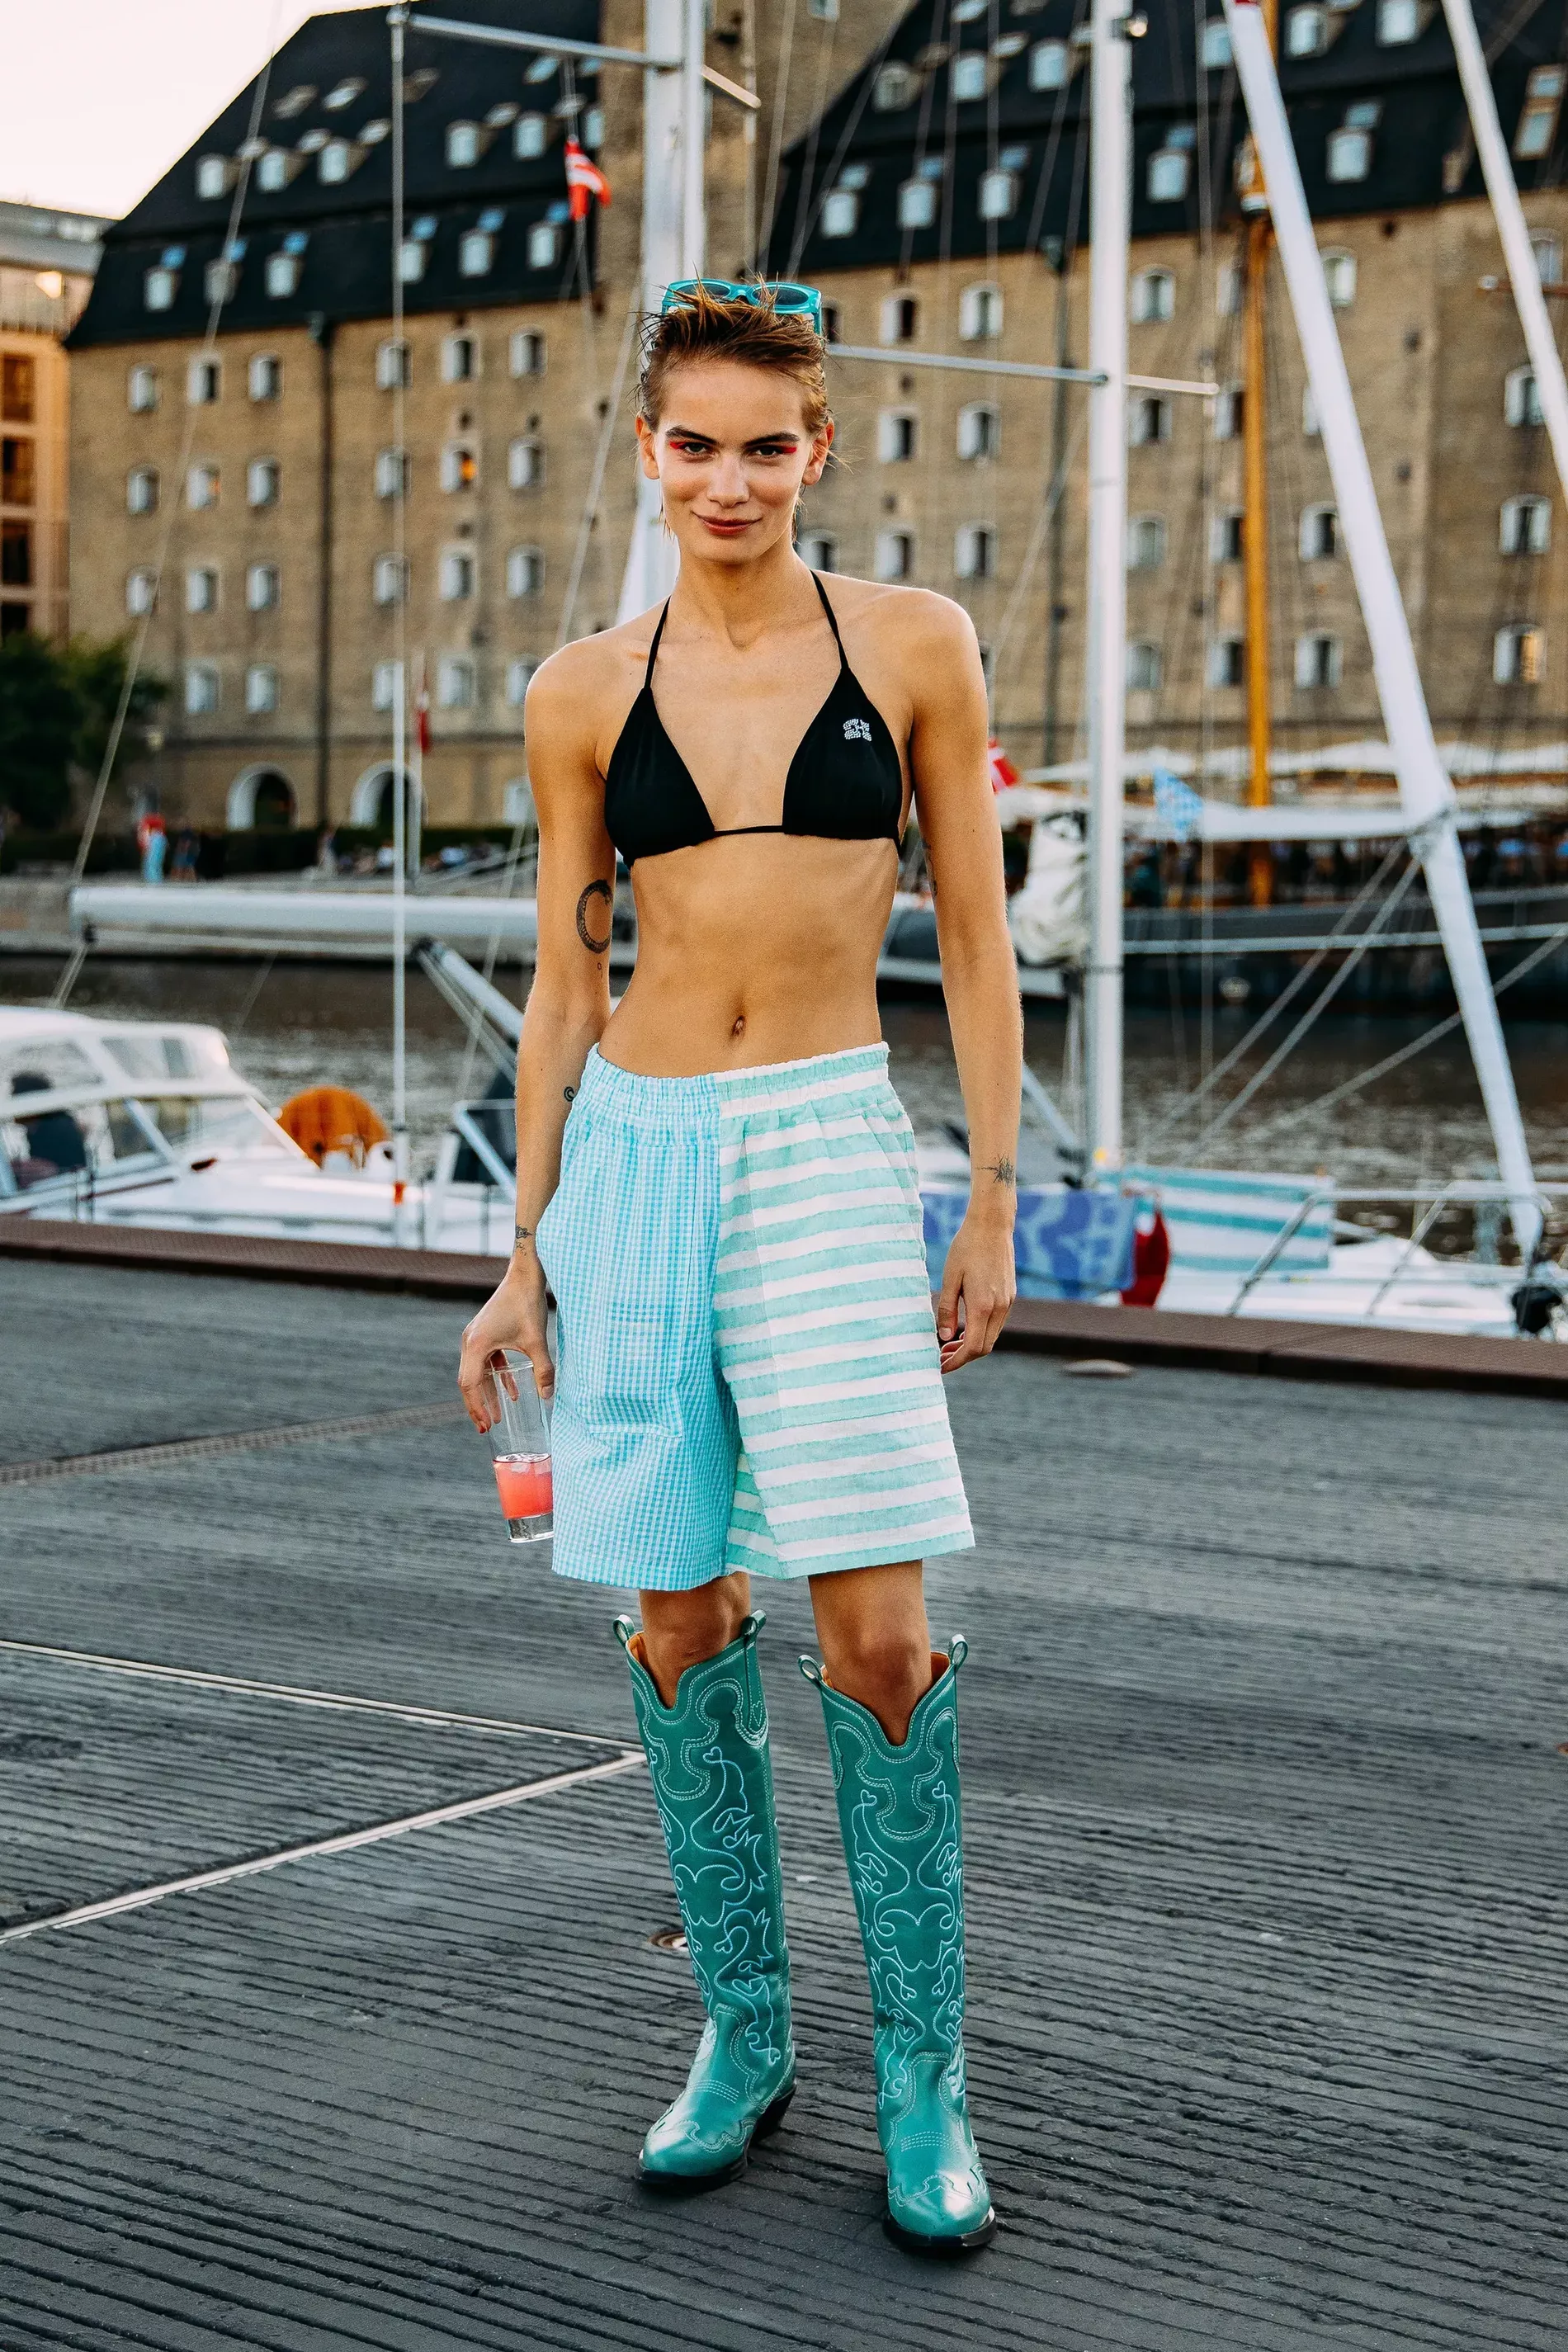 Copenhagen fashion week guest matches turquoise striped shorts with bikini top and cowboy boots 